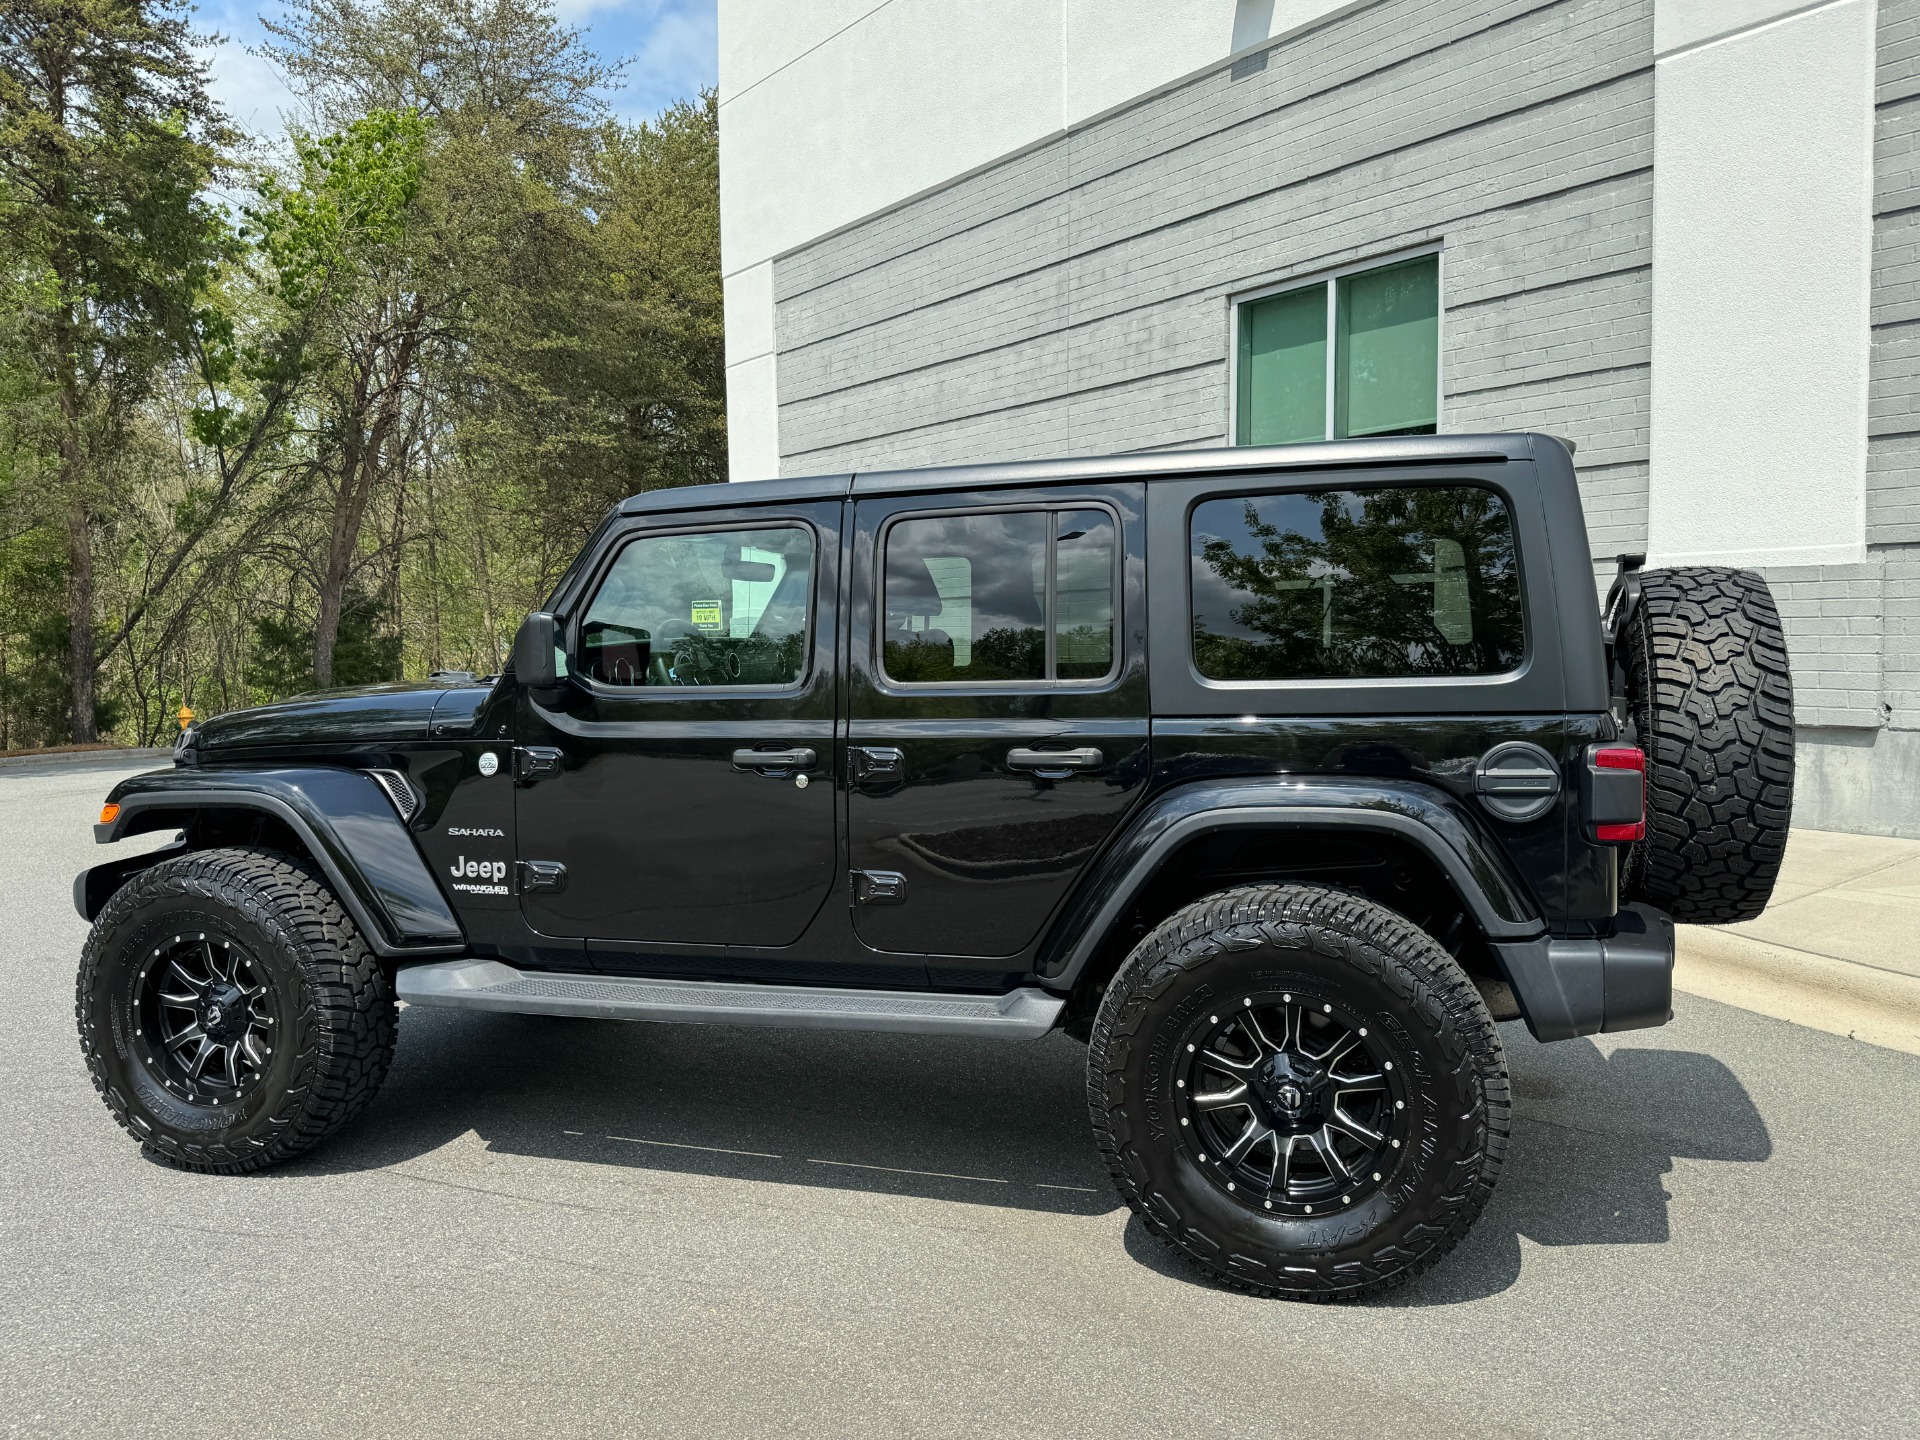 Used 2018 Jeep WRANGLER UNLIMITED SAHARA 4X4 / MANUAL / NAV / ALPINE / FREEDOM TOP / REARVIEW for sale Sold at Formula Imports in Charlotte NC 28227 7